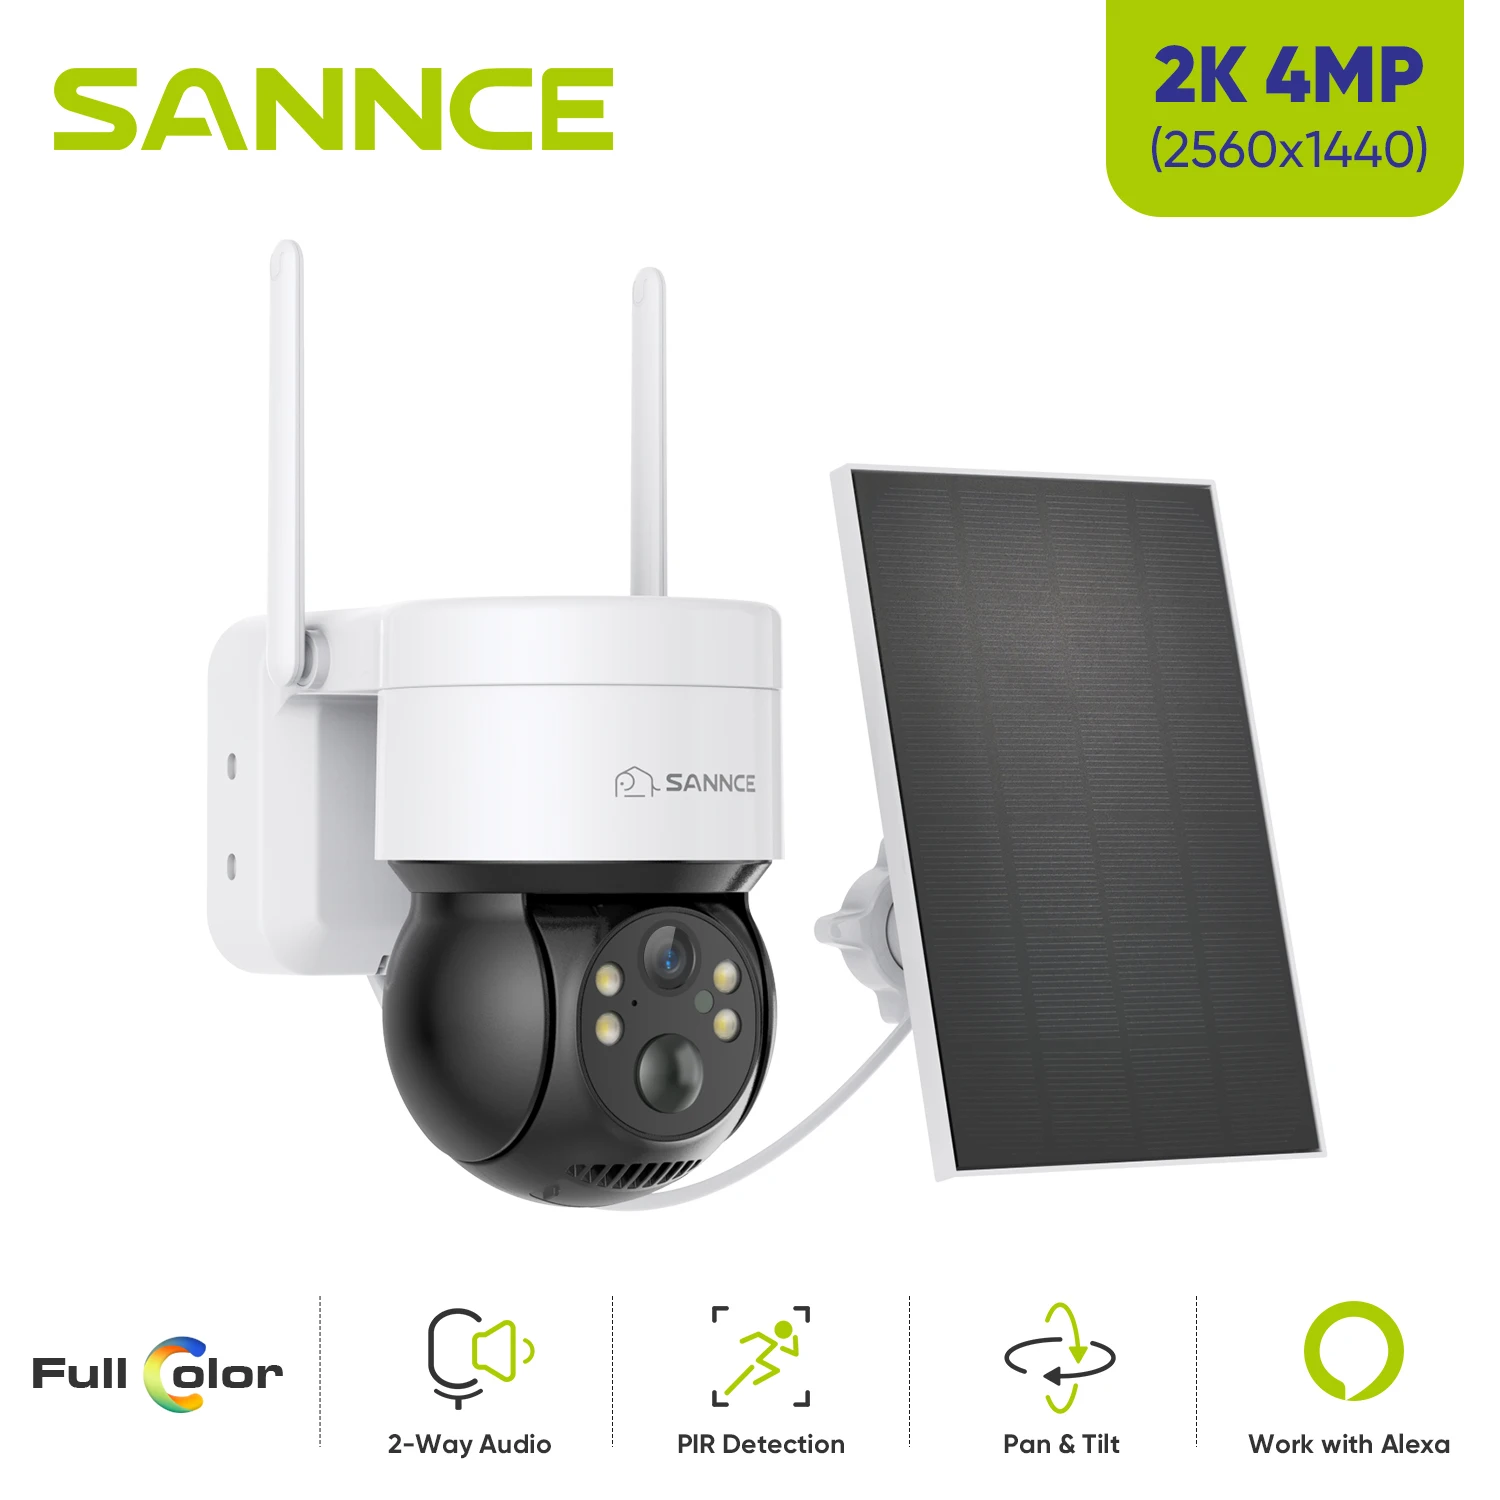 annke-4mp-wifi-video-security-surveillance-camera-two-way-audio-18650-rechargeable-battery-with-solar-panel-outdoor-128g-storage